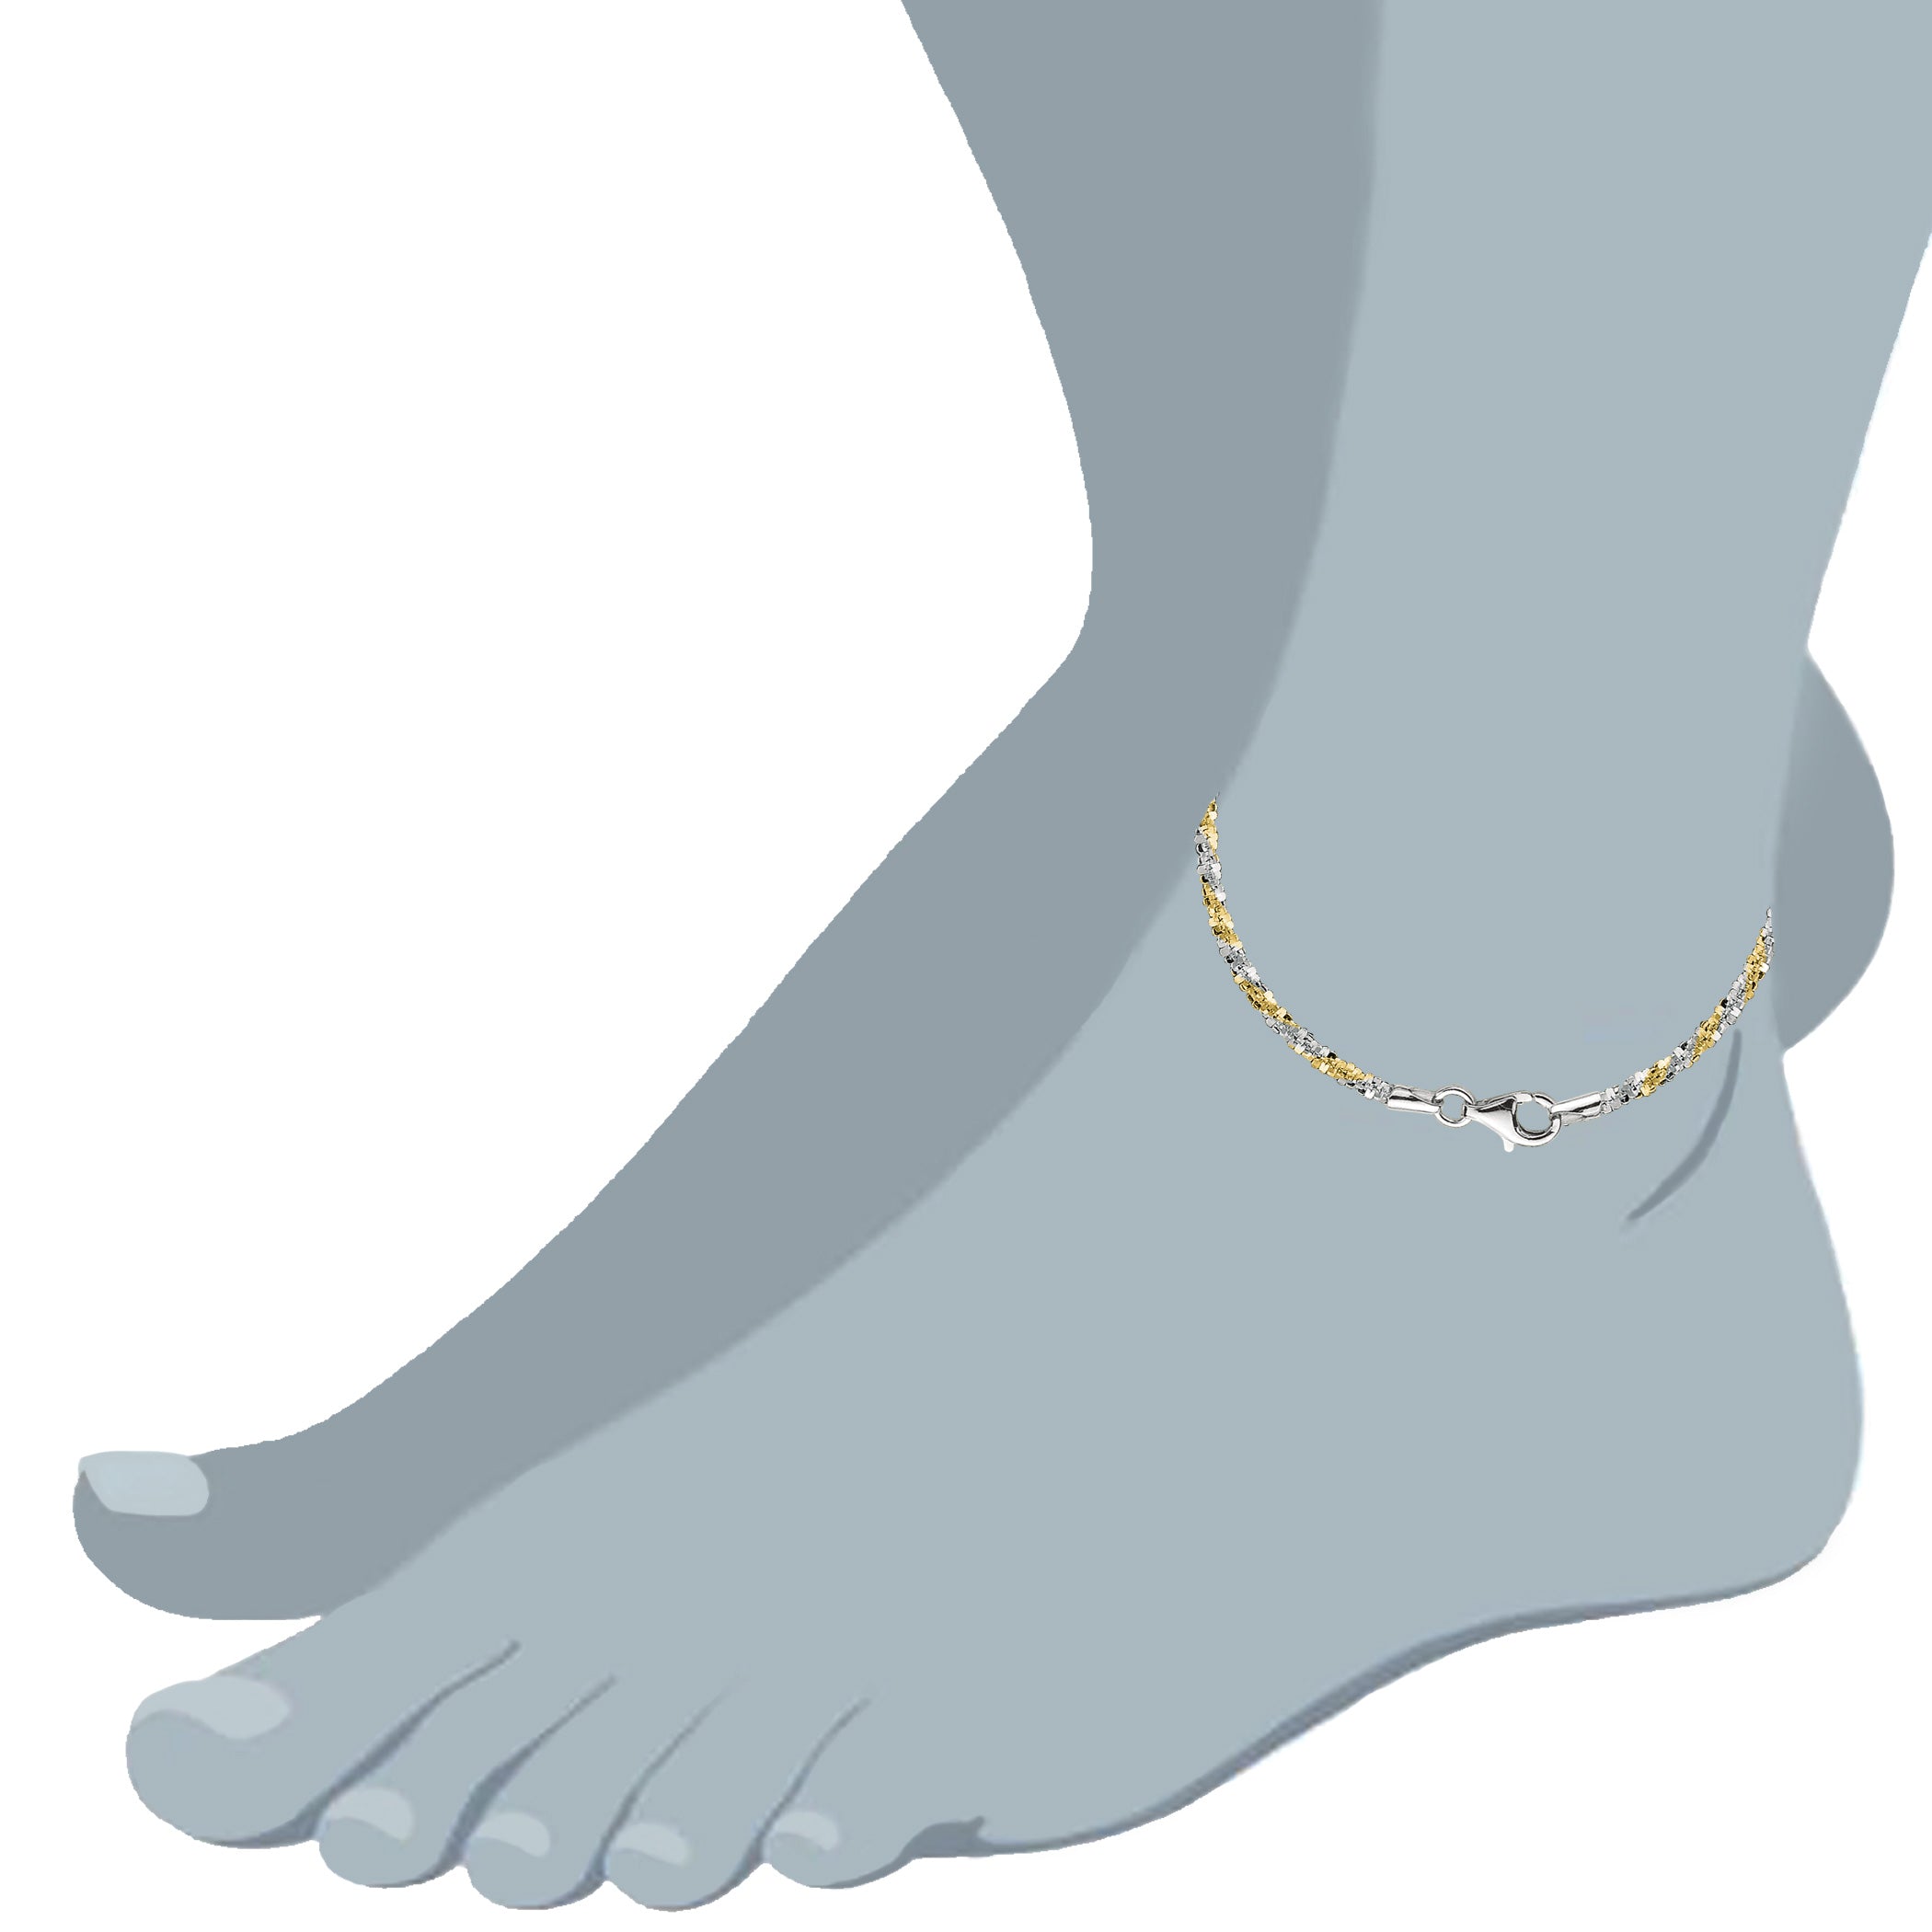 White And Yellow Sparkle Style Chain Anklet In Sterling Silver